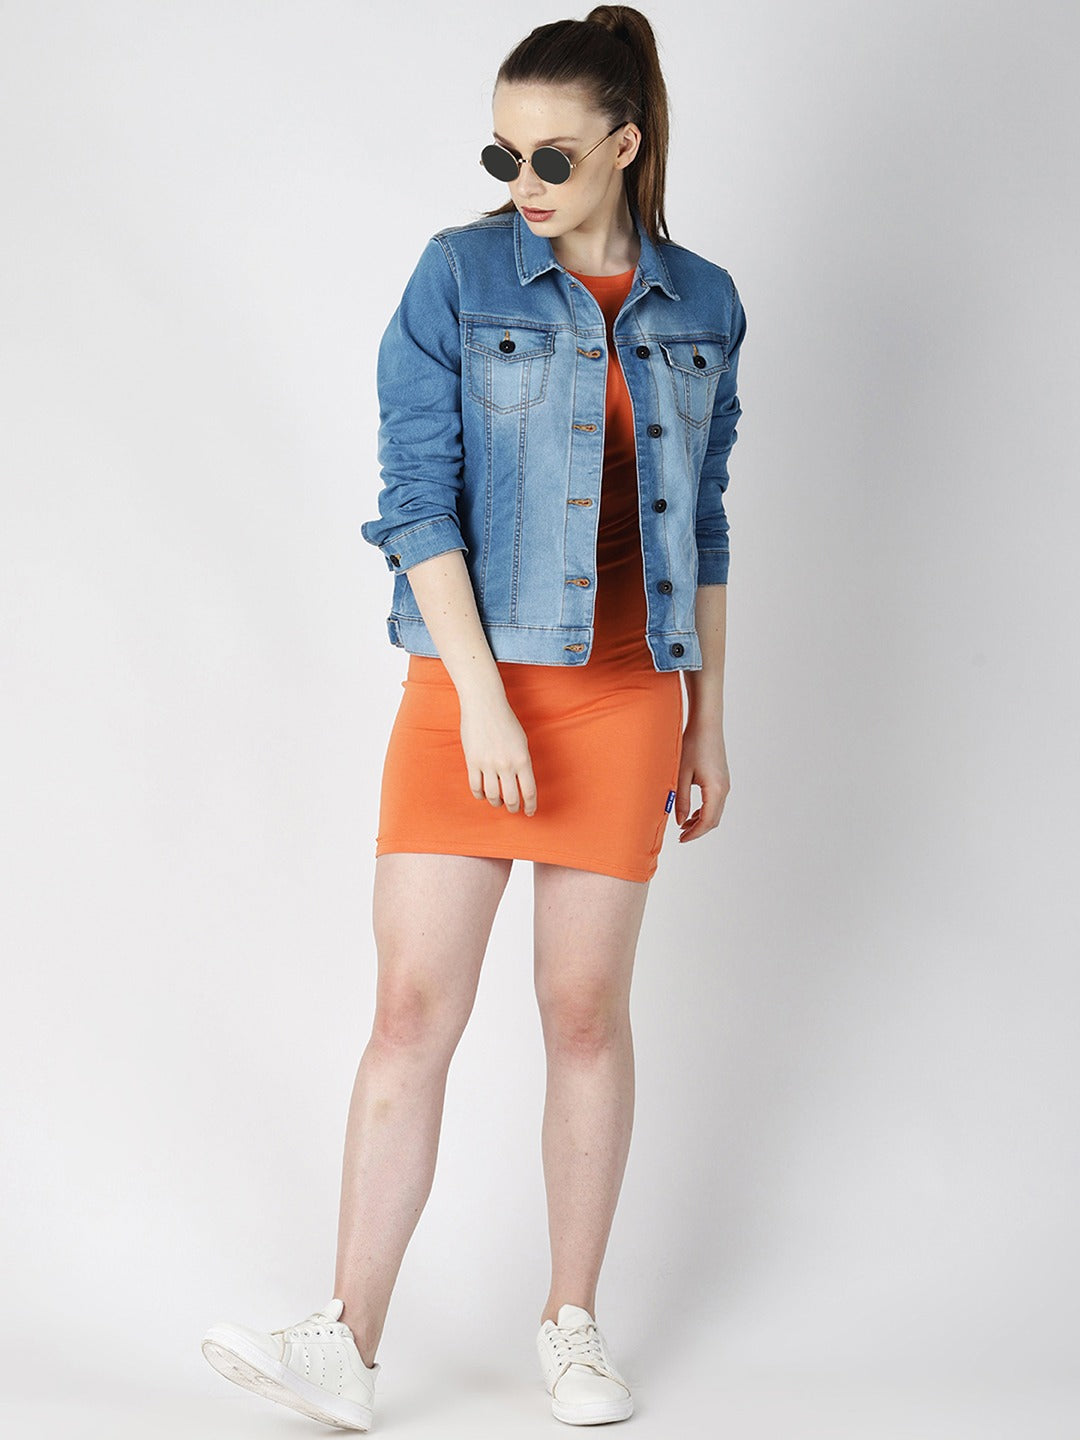 Stylish blue denim jacket, bright orange skirt, sunglasses, and casual white sneakers - a trendy, fashionable outfit showcased by the young woman in the image.